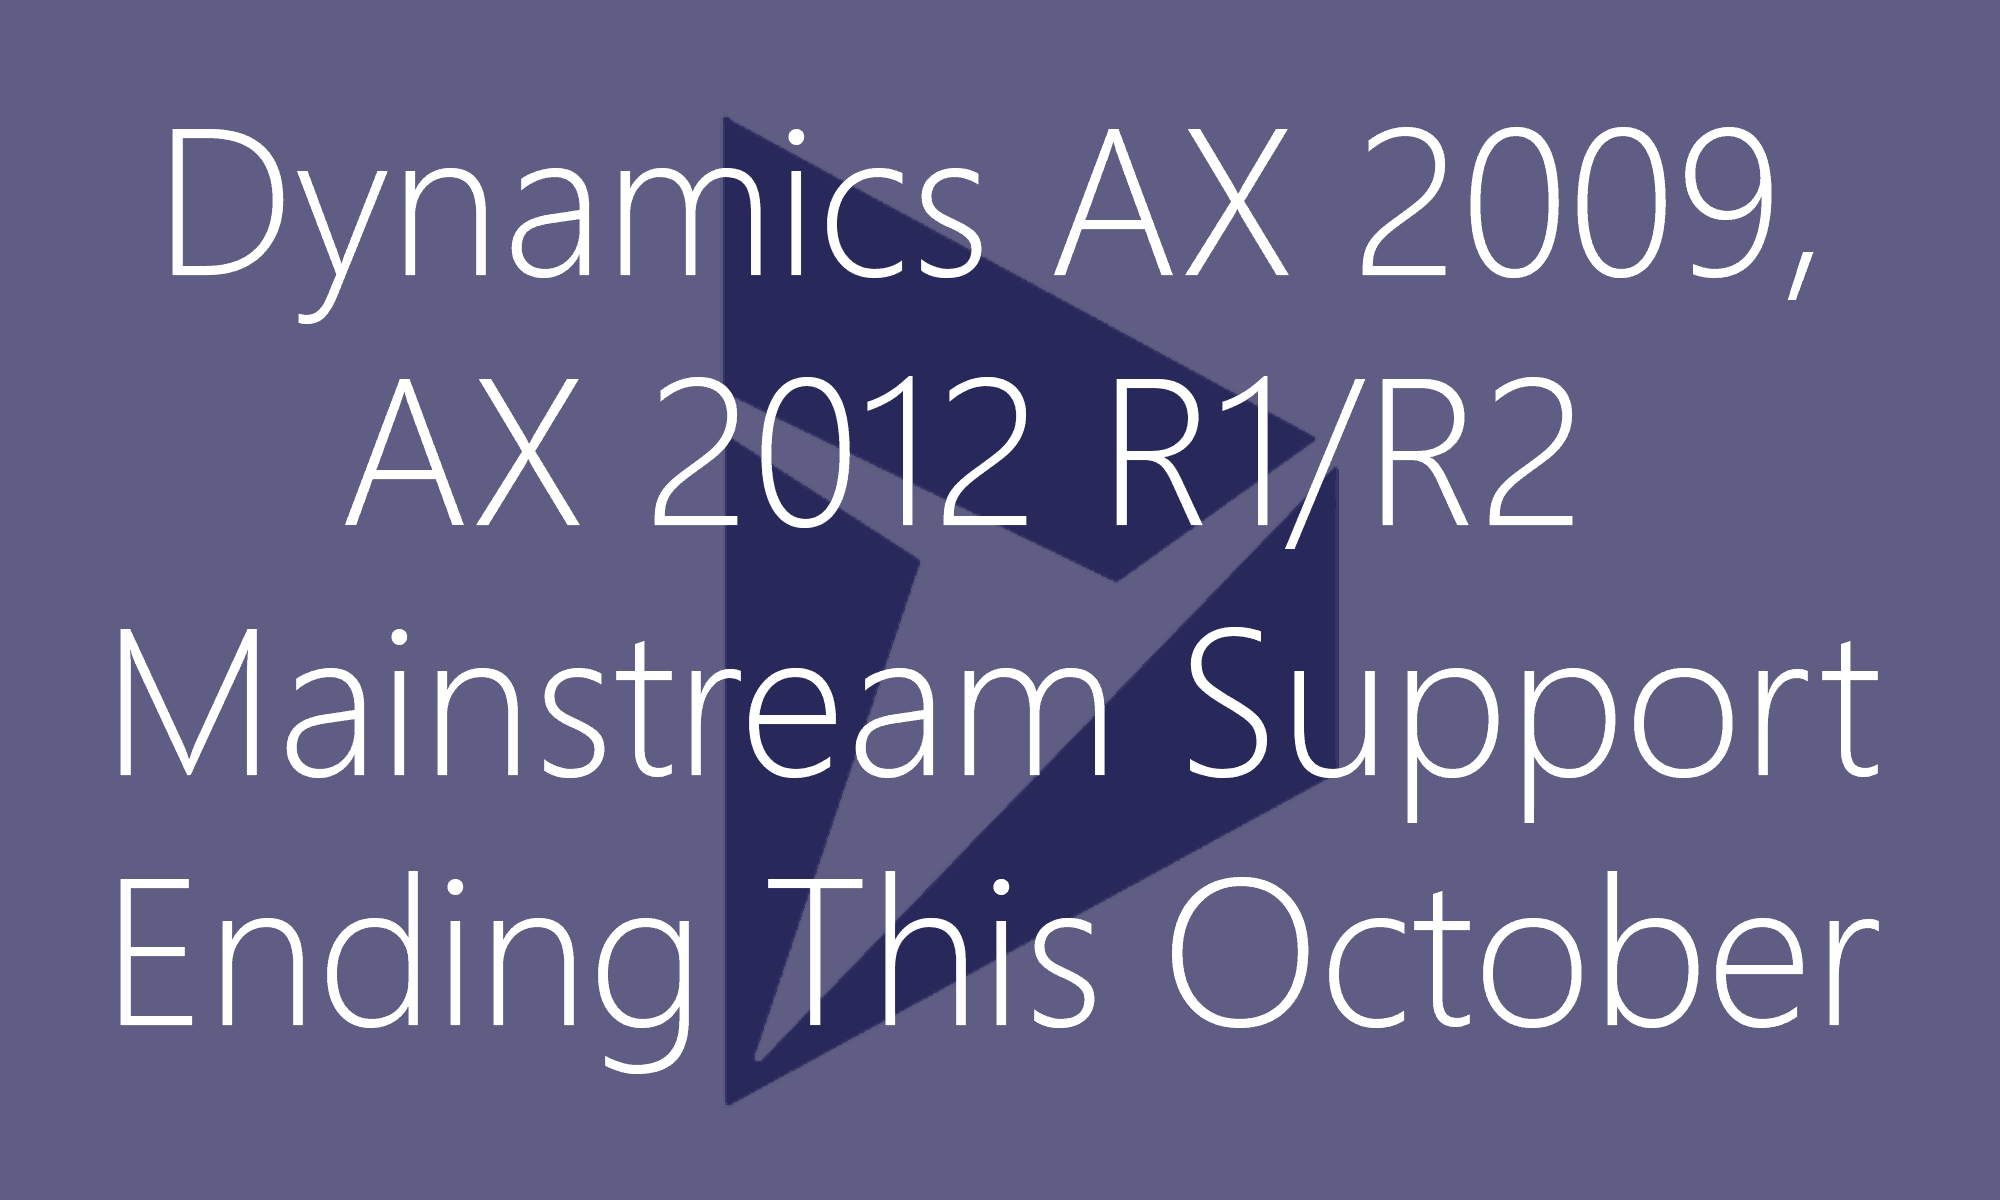 AX 2009 and AX 2012 R1R2 Mainstream Support